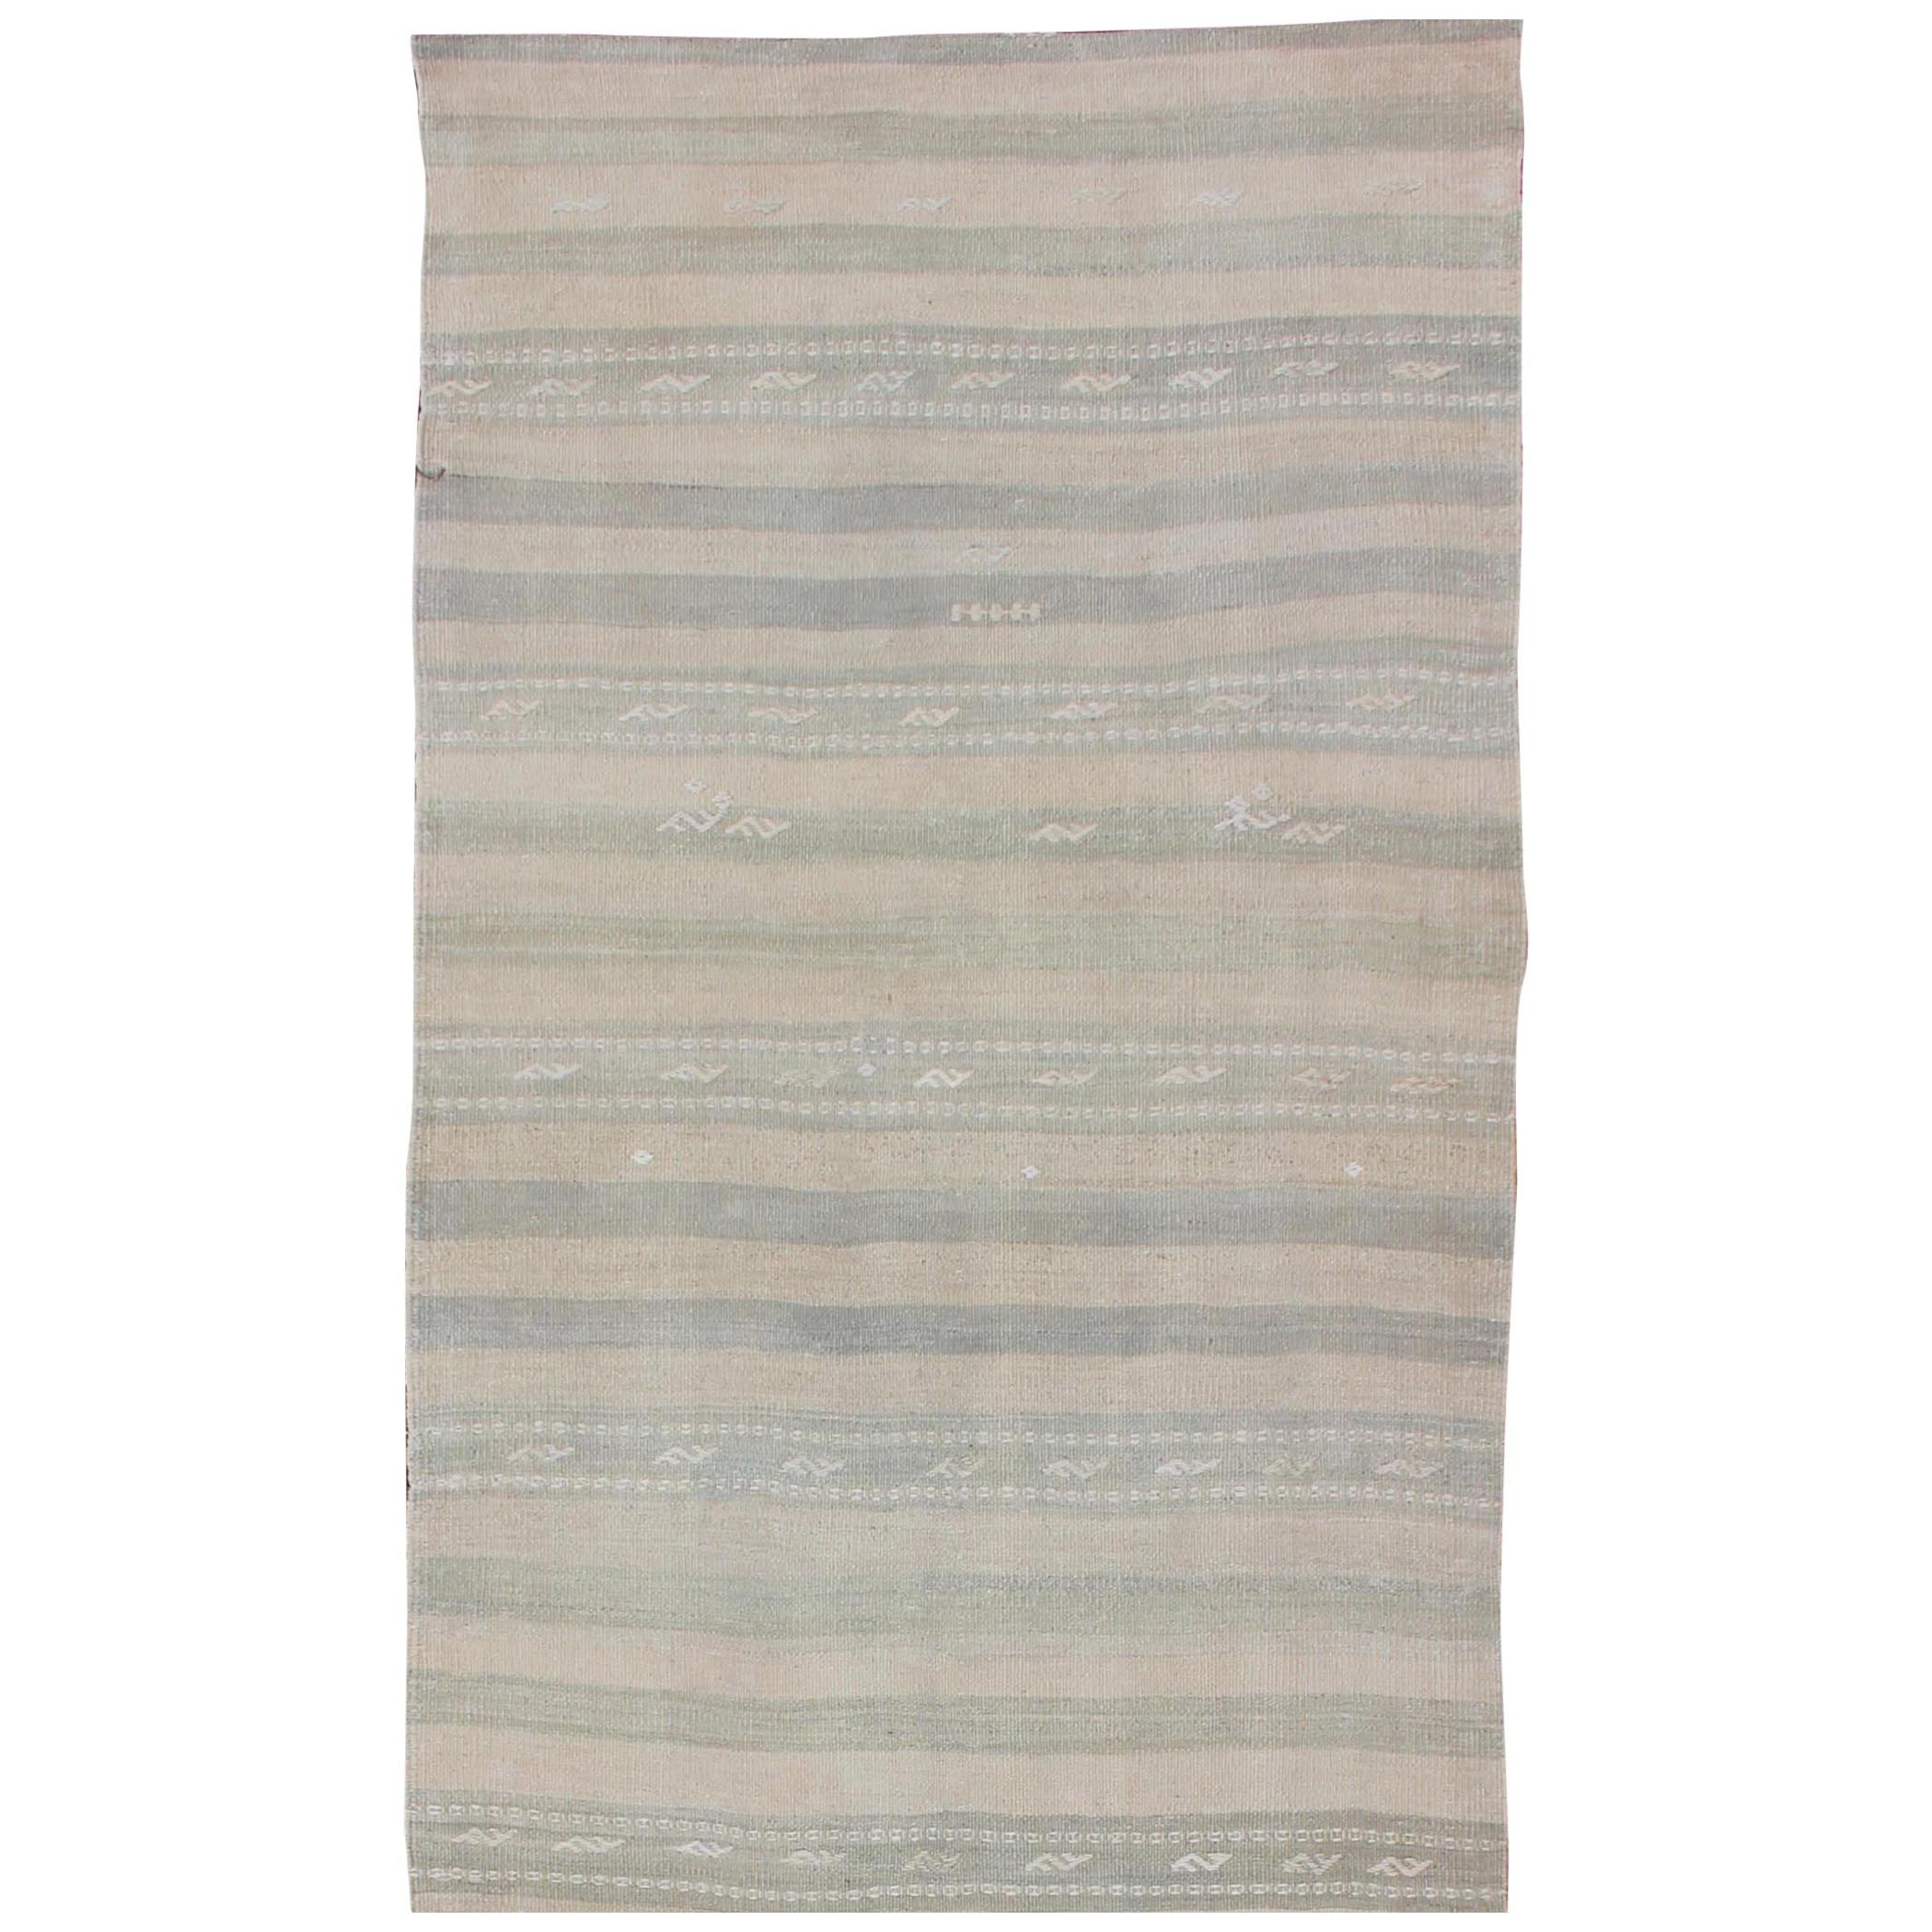 Vintage Turkish Kilim Runner with Stripes in Light Taupe and Neutral Tones For Sale